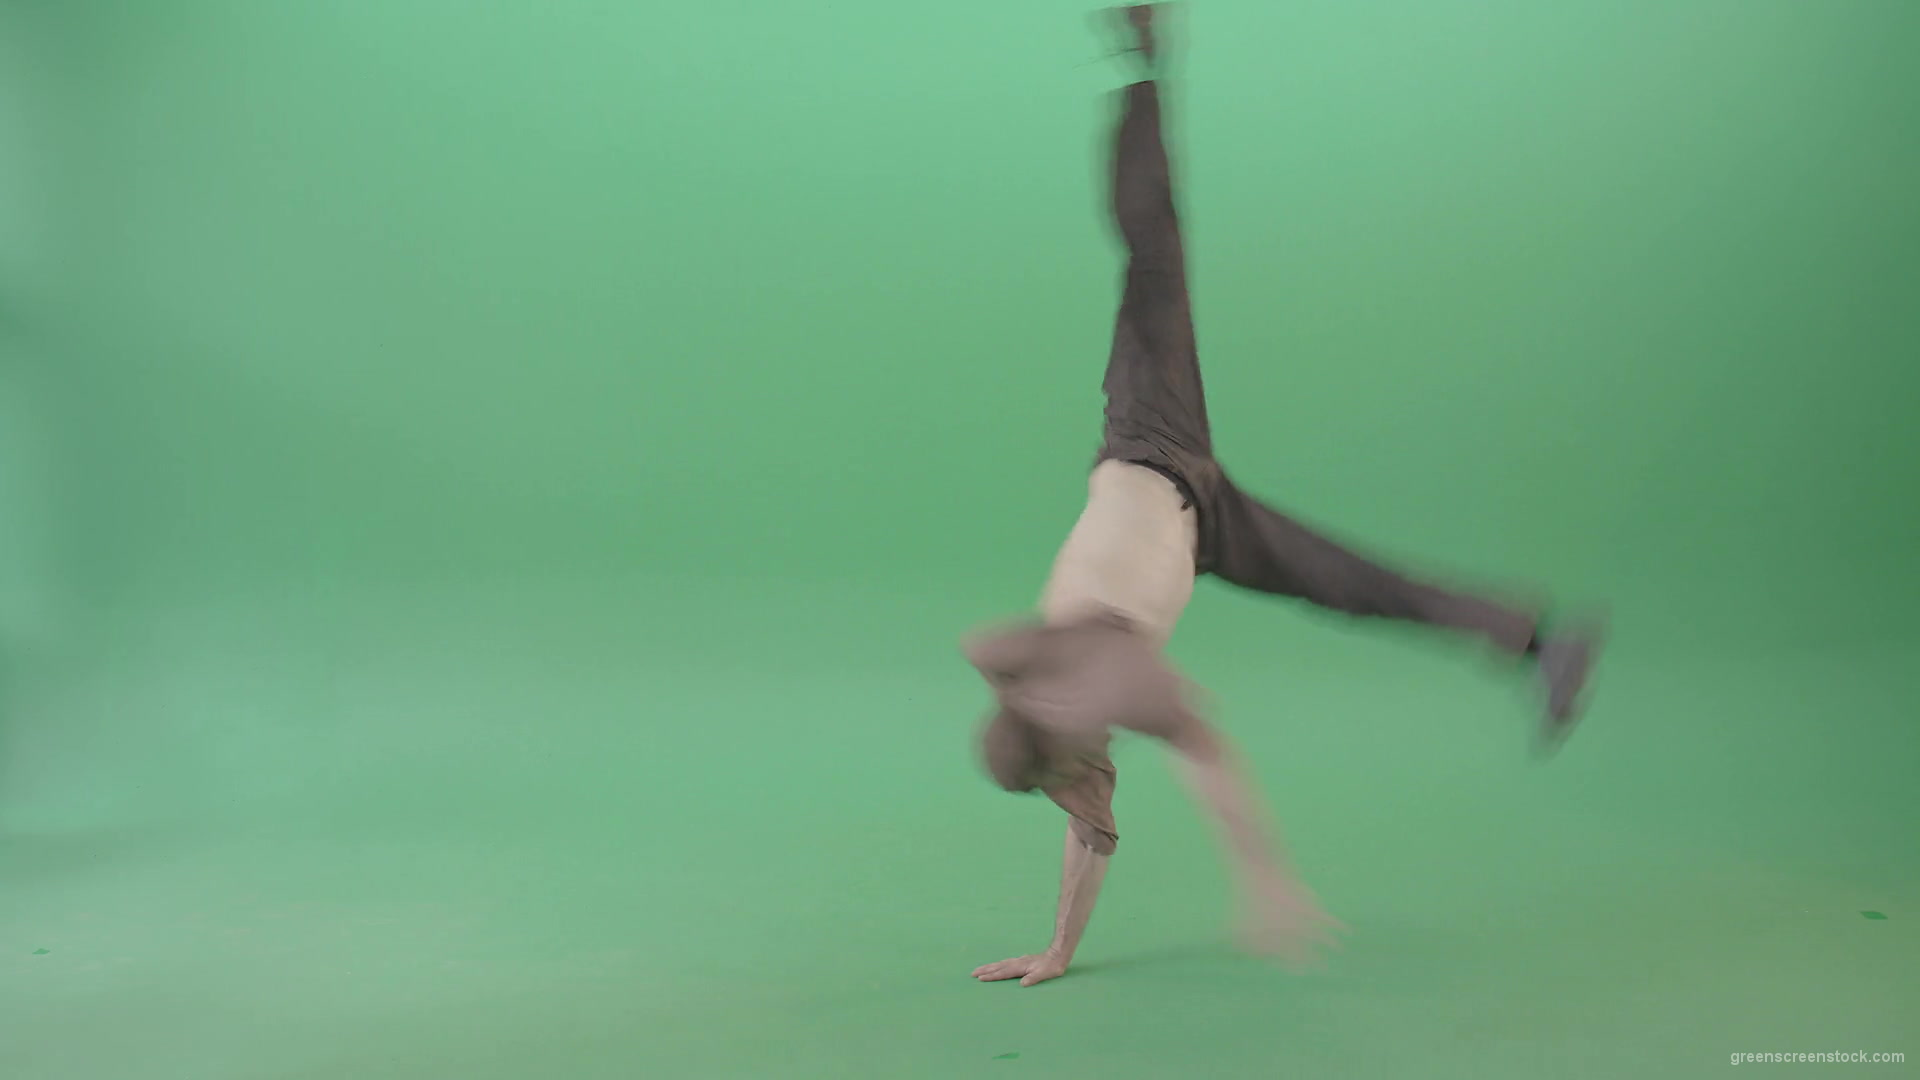 Sport-gymnastic-break-dance-by-athletic-man-isolated-on-green-screen-4K-Video-Footage-1920_007 Green Screen Stock